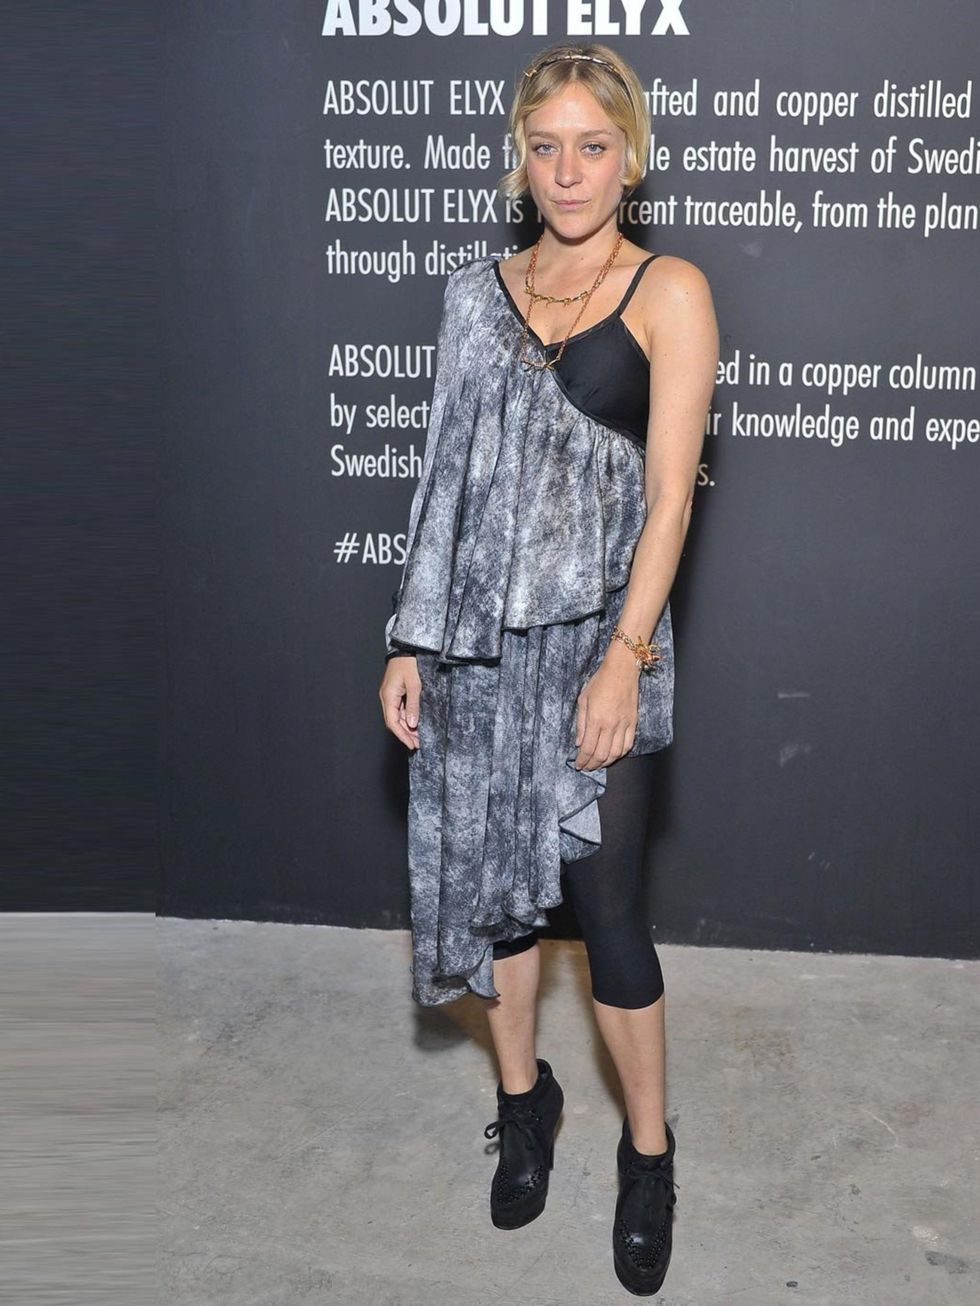 <p><a href="http://www.elleuk.com/star-style/celebrity-style-files/chloe-sevigny">Chloe Sevigny</a> in <a href="http://www.elleuk.com/catwalk/designer-a-z/rodarte/spring-summer-2014">Rodarte</a> at the Absolut Elyx launch party, New York, May 2013.</p><p>